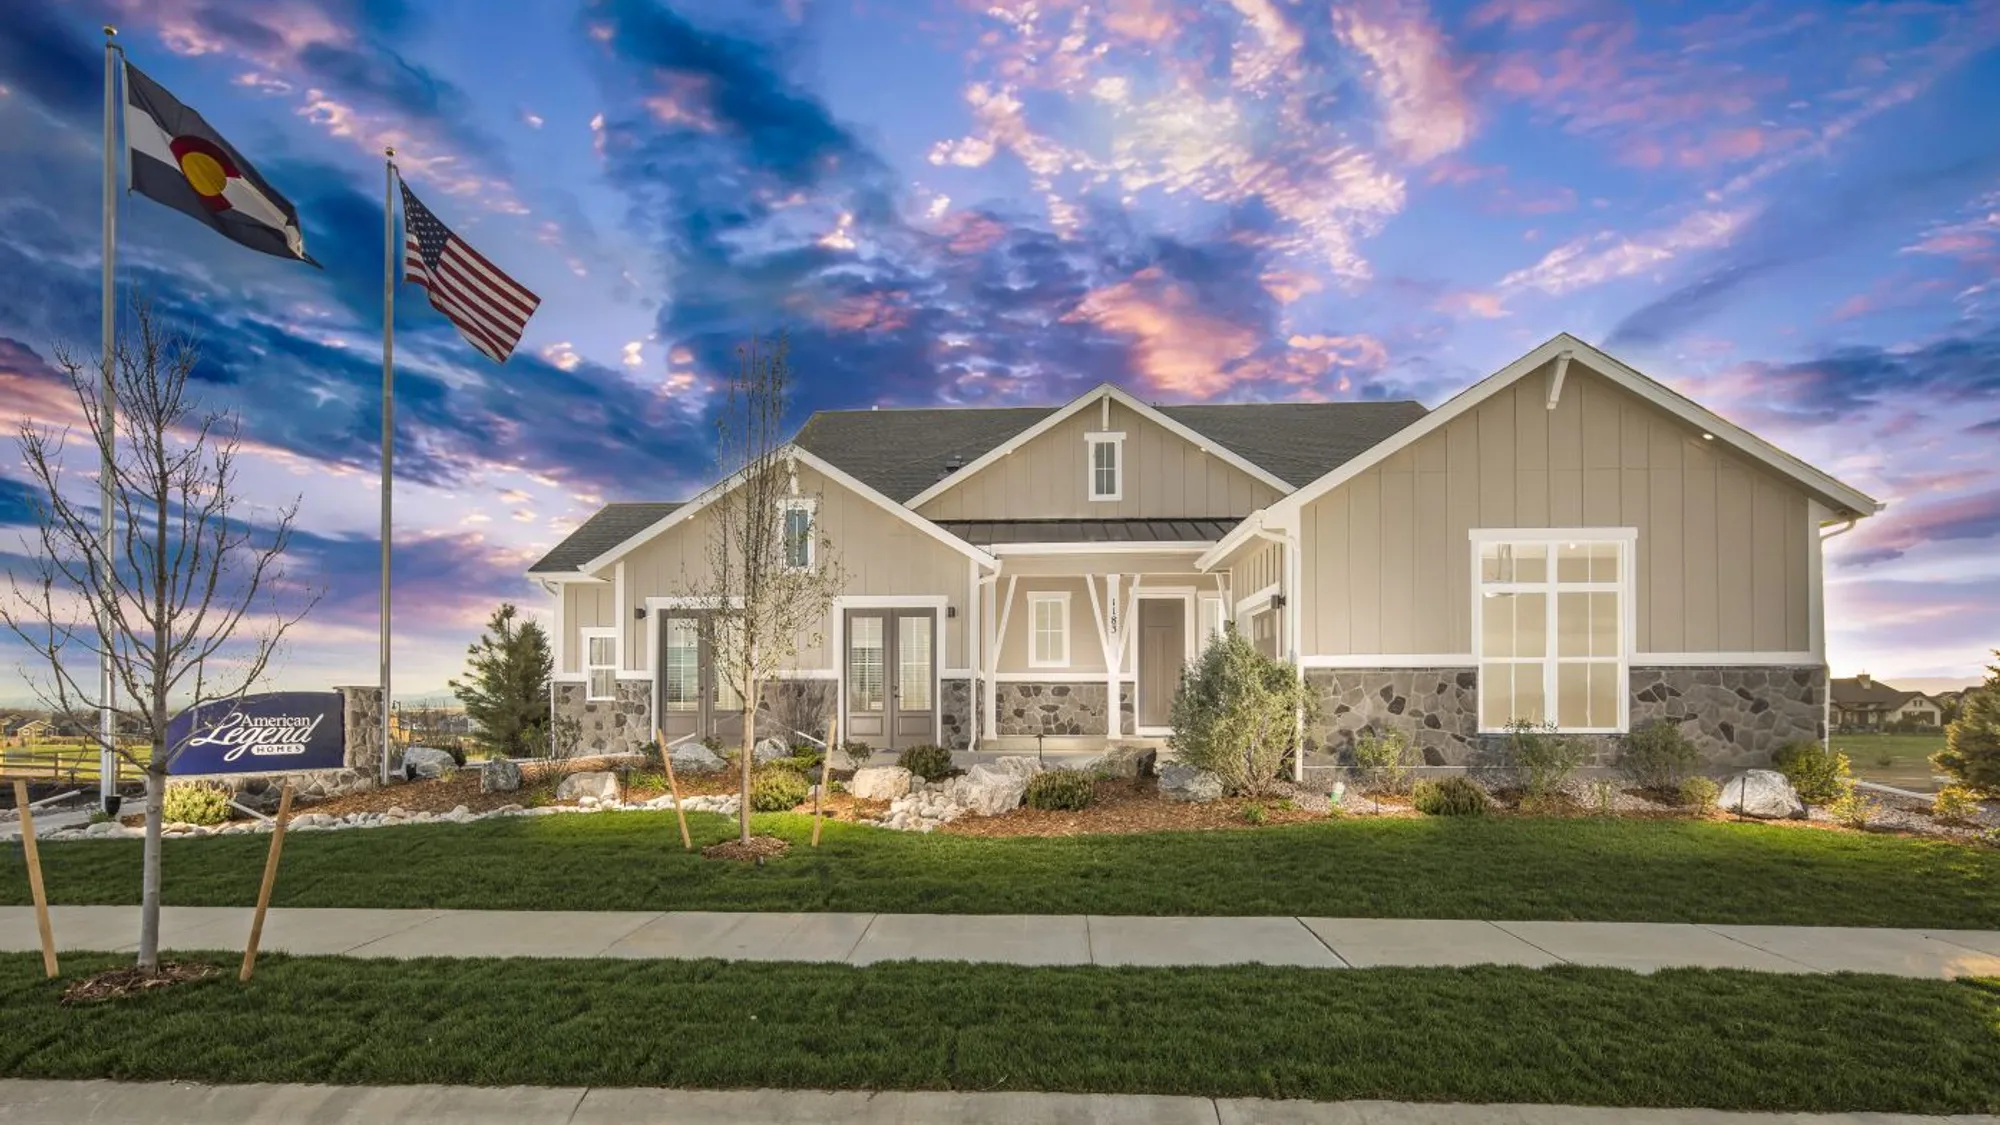 Plan C652 Front Elevation by American Legend Homes